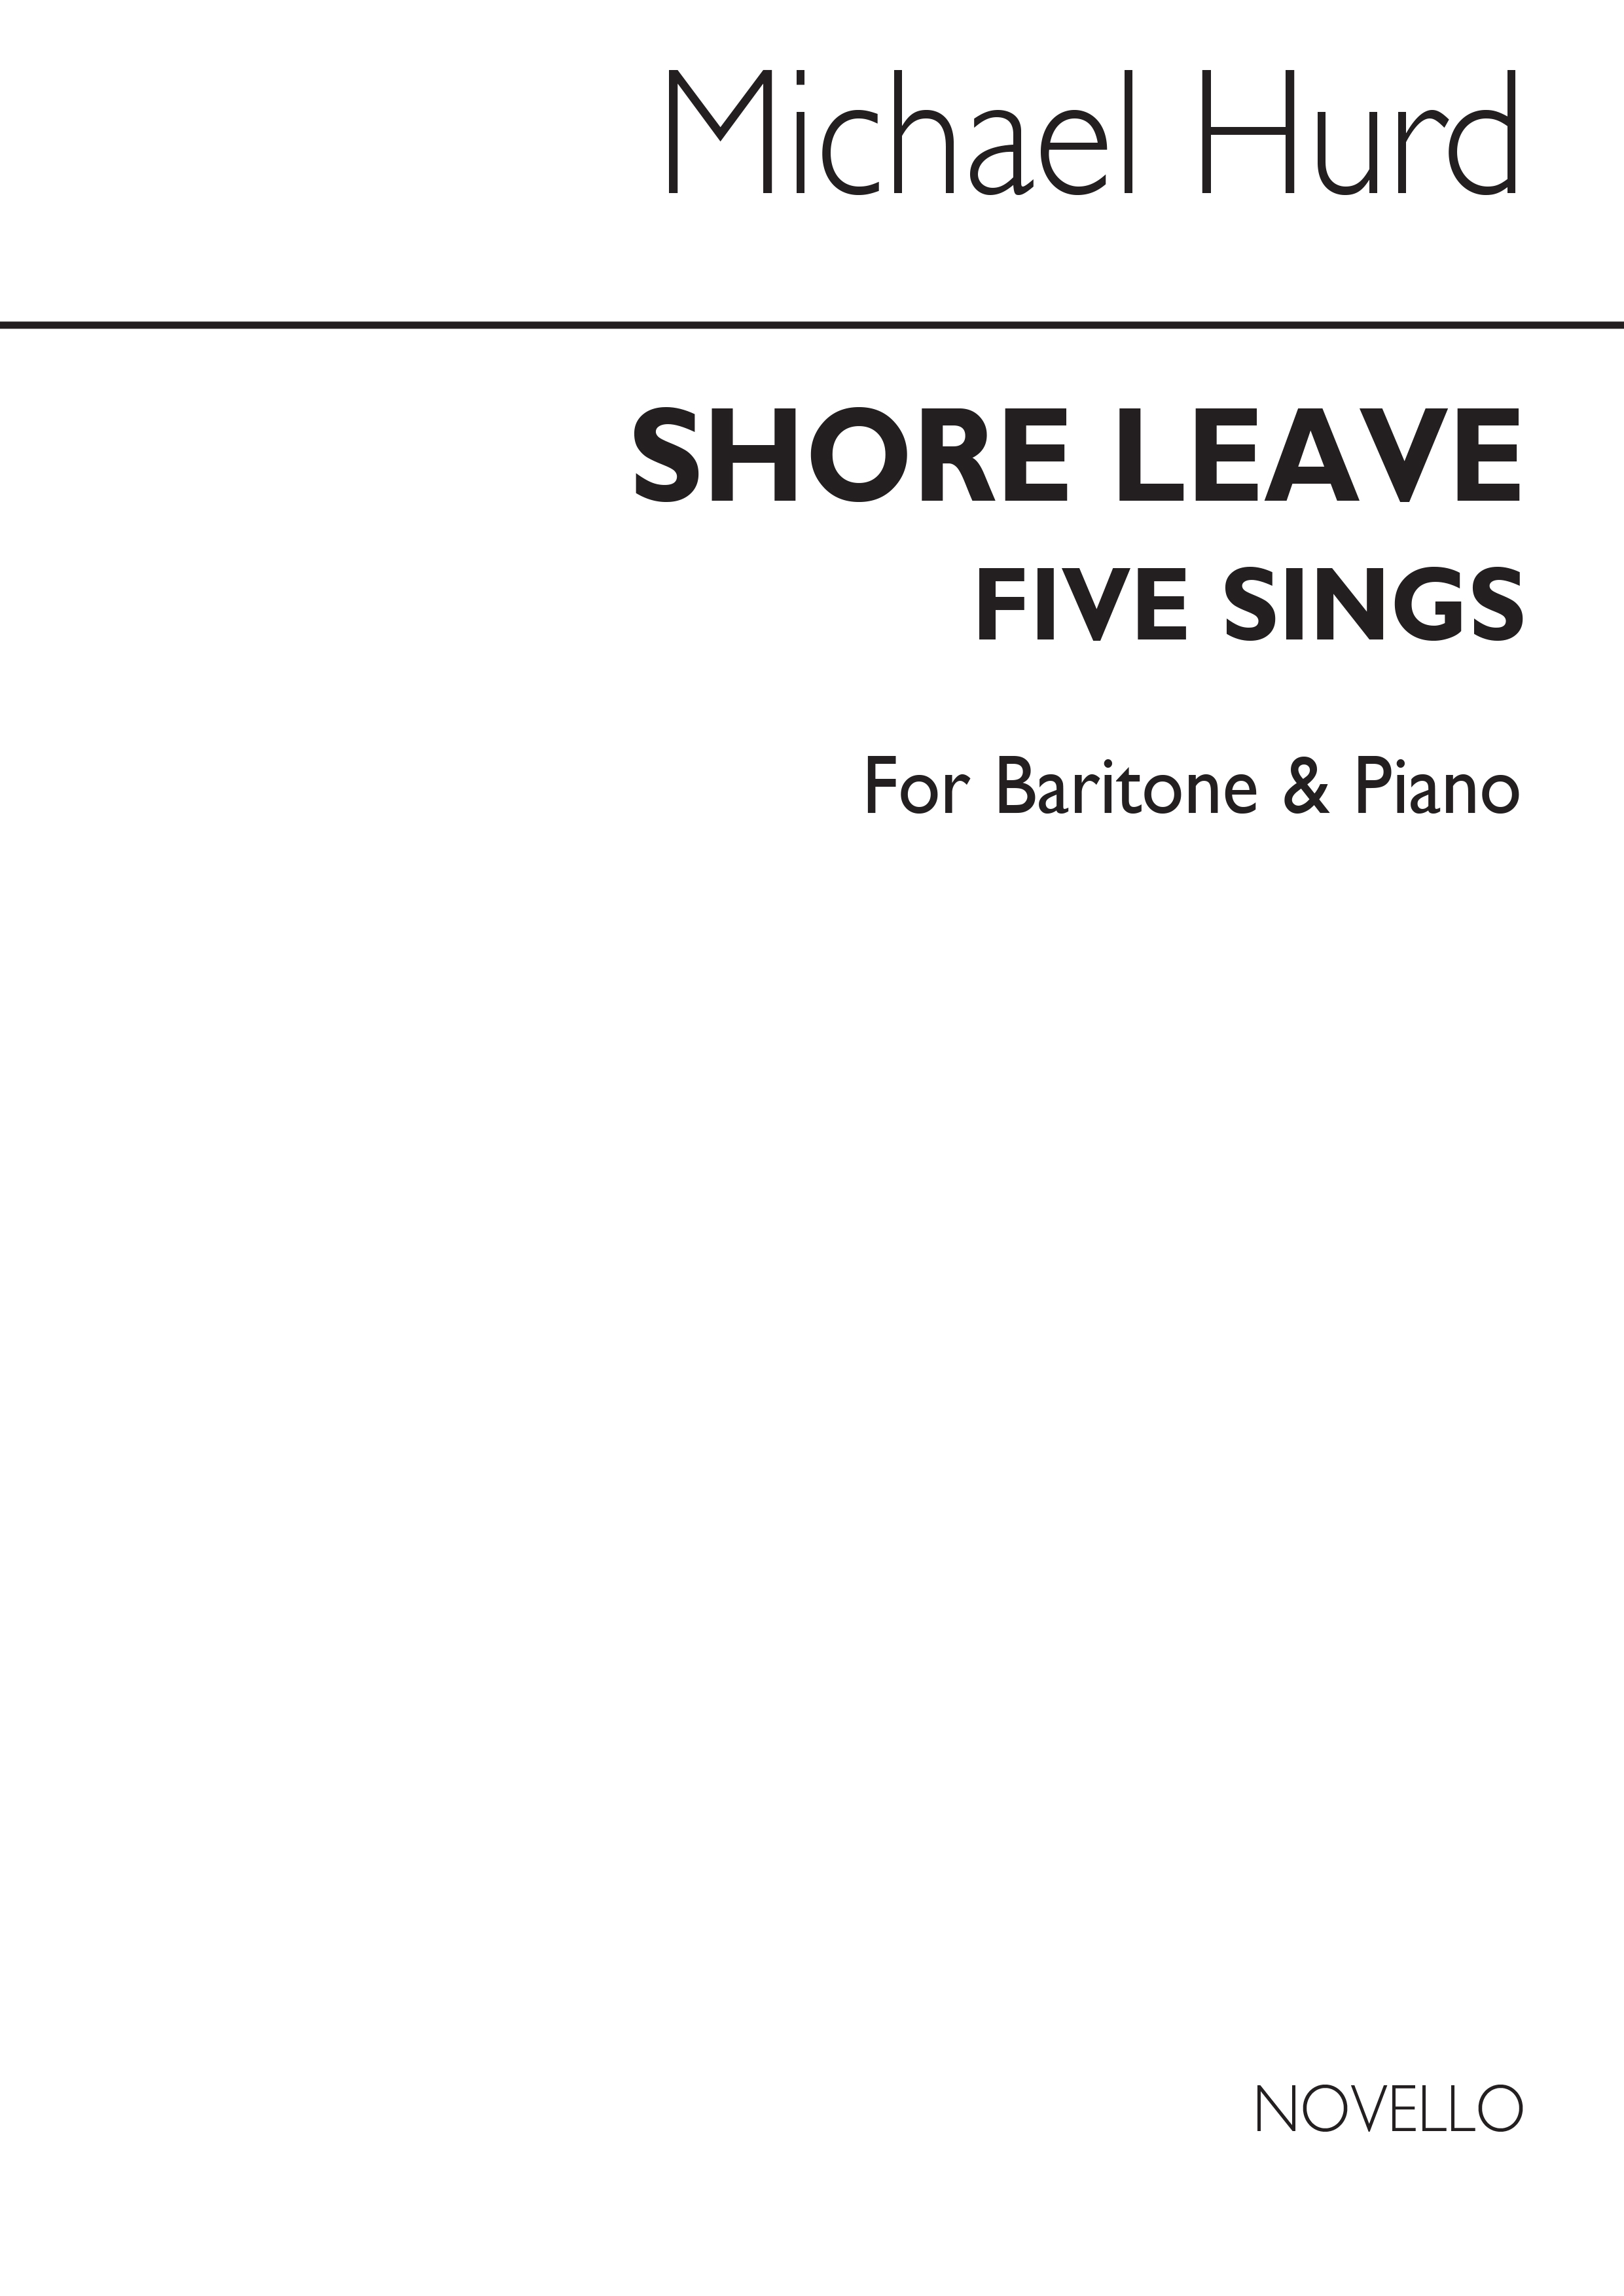 Hurd: Shore Leave 5 Songs for Baritone and Piano